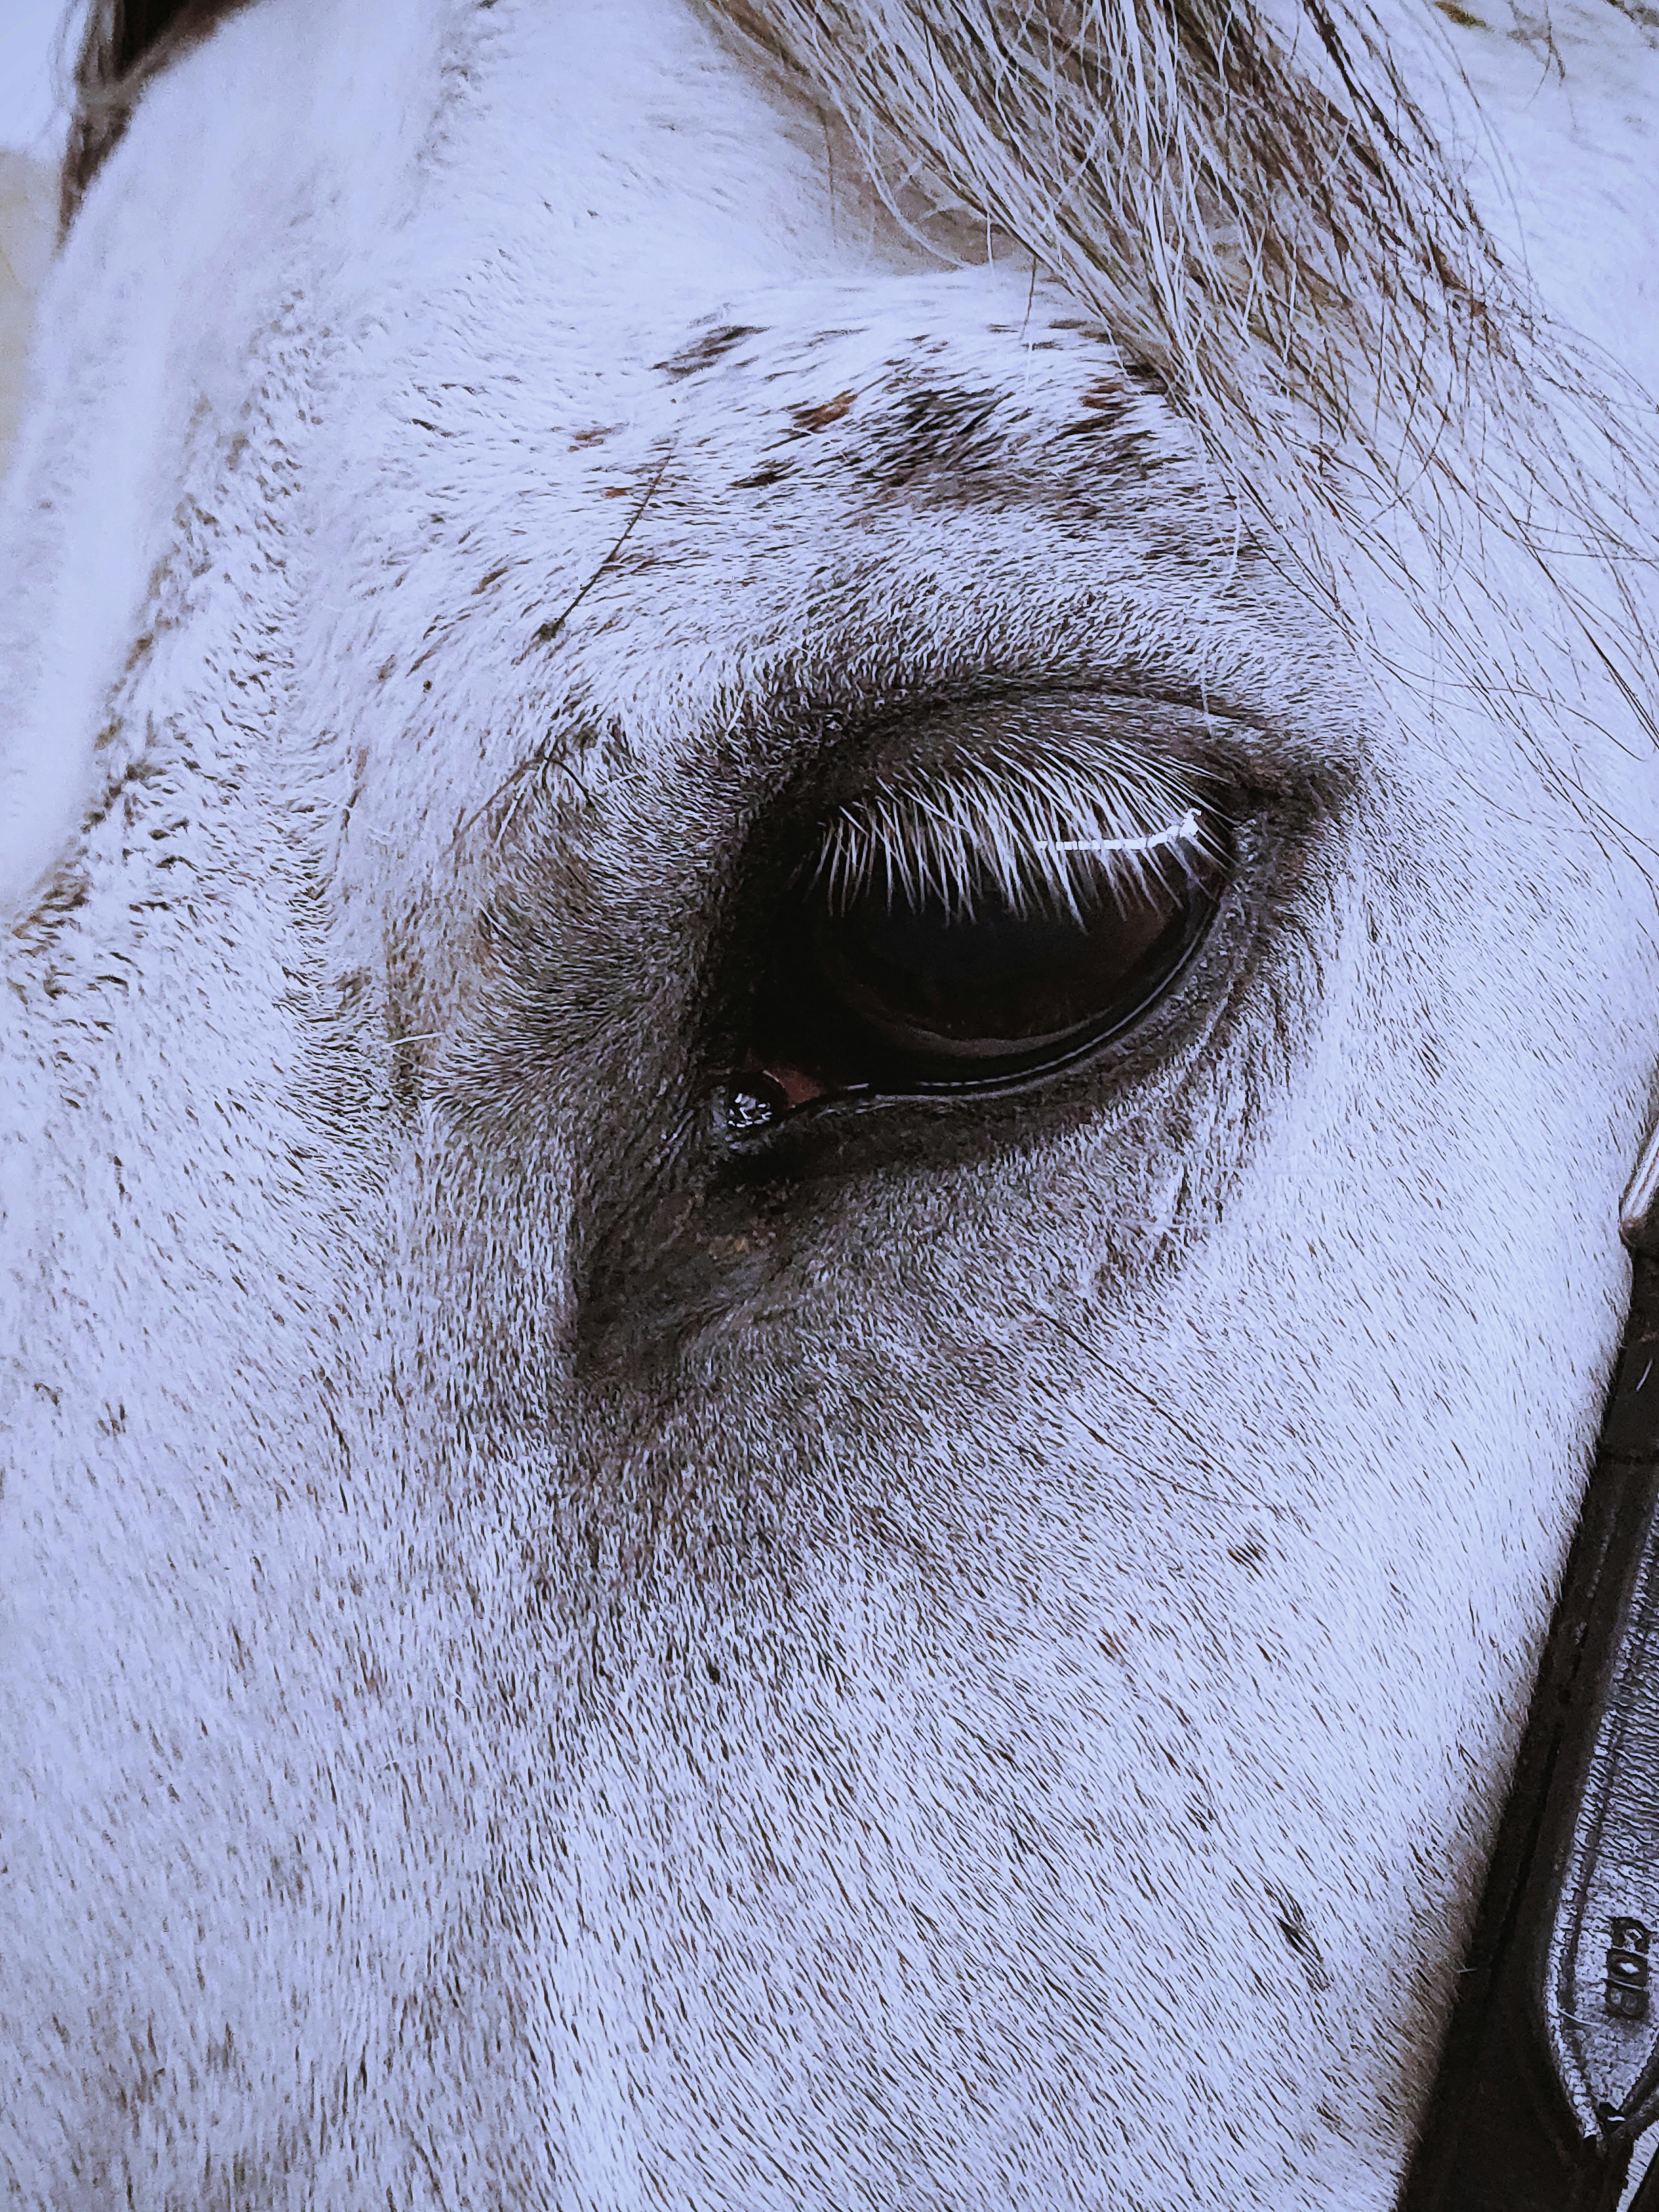 60,000+ Best White Horse Images · 100% Royalty Free Photo Downloads ·  Pexels · Free Stock Photos